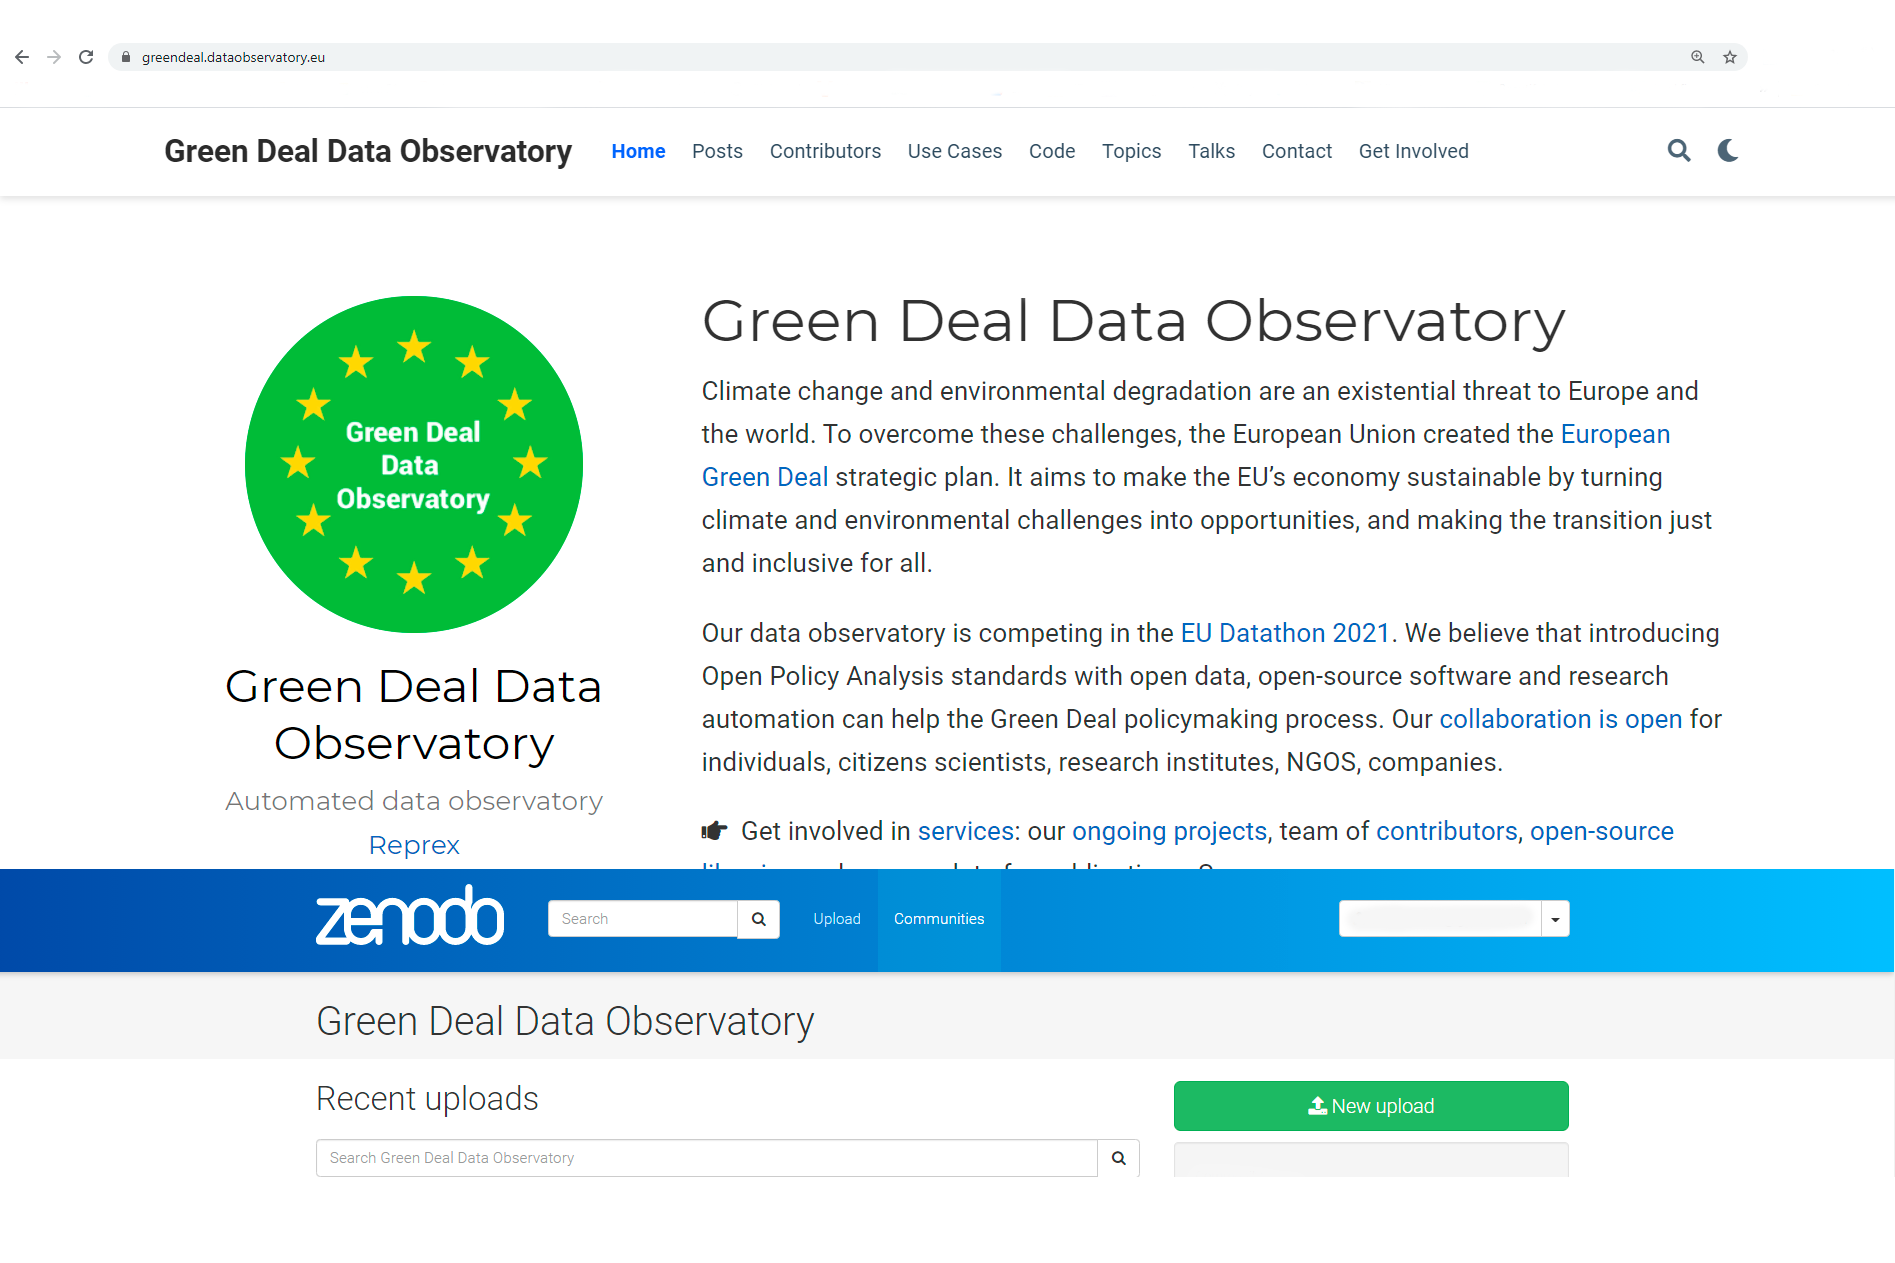 Join our open collaboration Green Deal Data Observatory team as a [data curator](/authors/curator), [developer](/authors/developer) or [business developer](/authors/team), or share your data in our public repository [Green Deal Data Observatory on Zenodo](https://zenodo.org/communities/greendeal_observatory/).